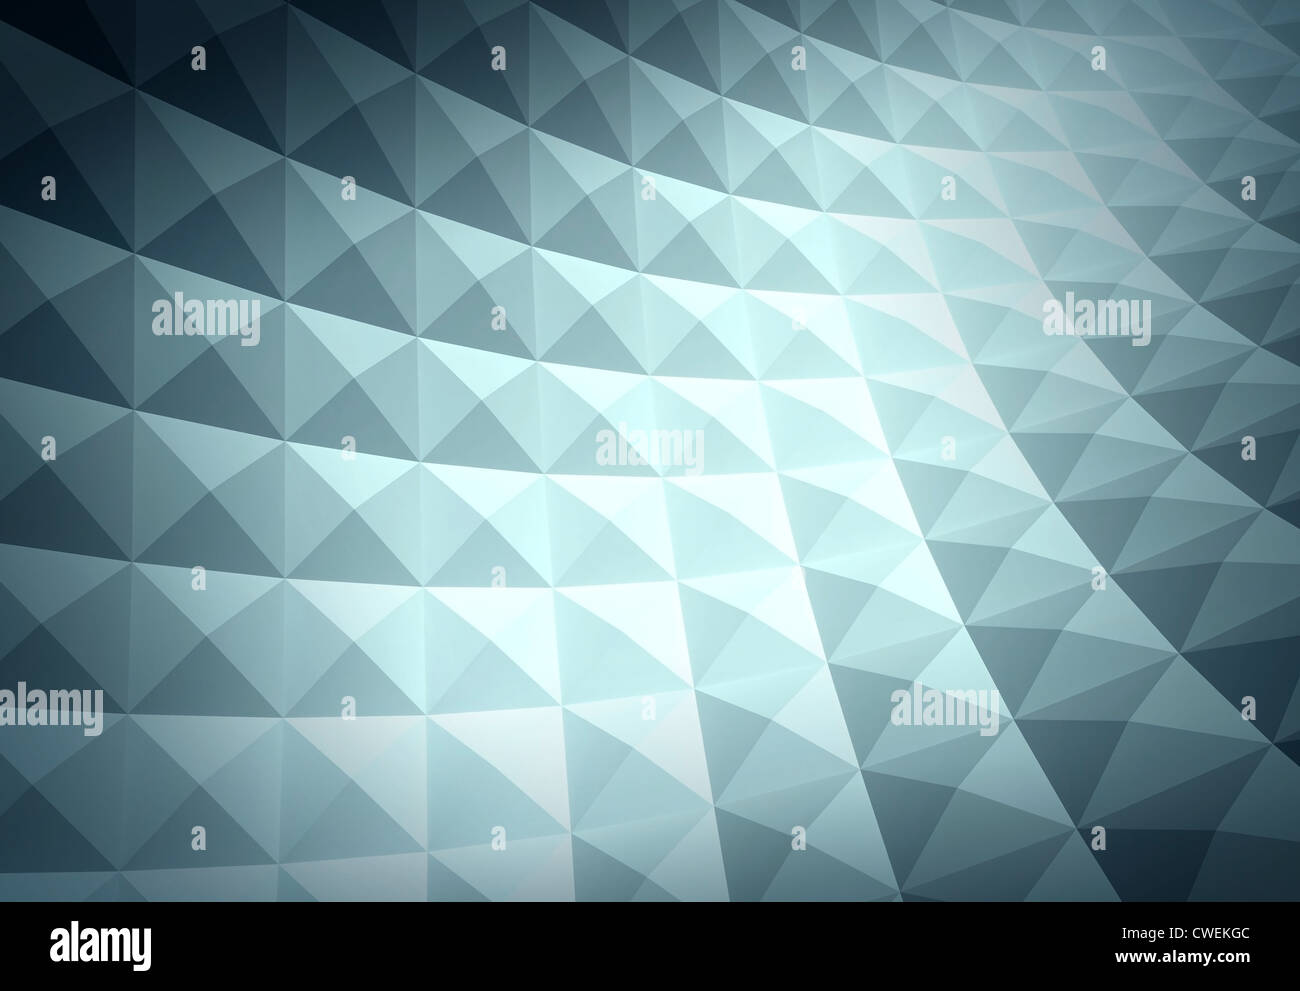 3d abstract geometric background. Blue shining bright square pyramidal cellular curved surface Stock Photo